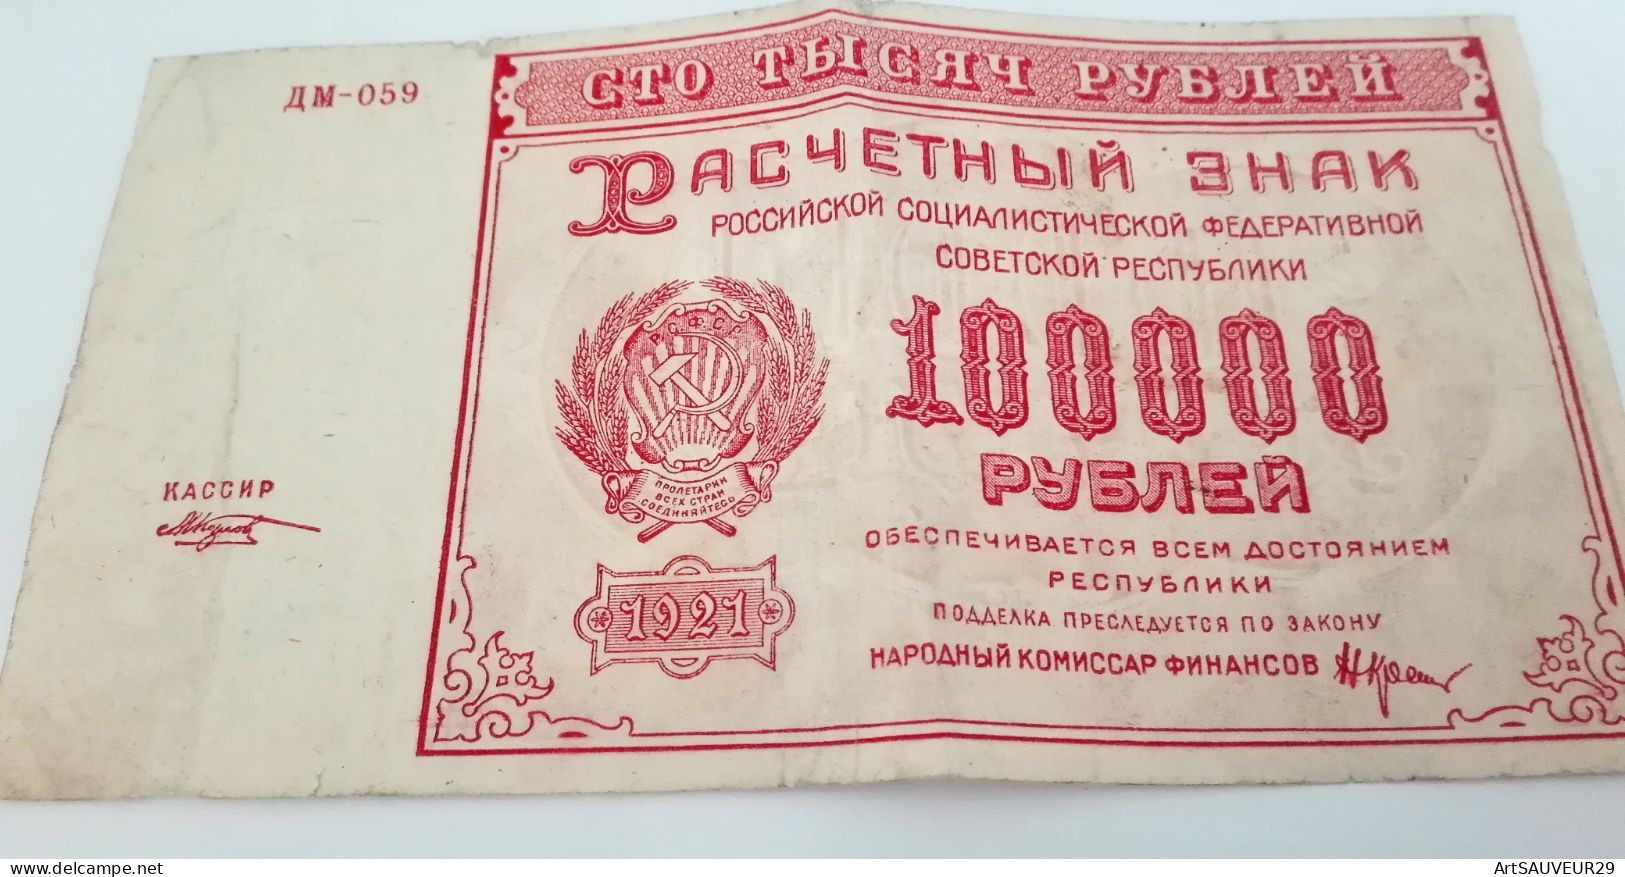 BILLET RUSSIE - 100.000 ROUBLES 1921 - Andere - Europa